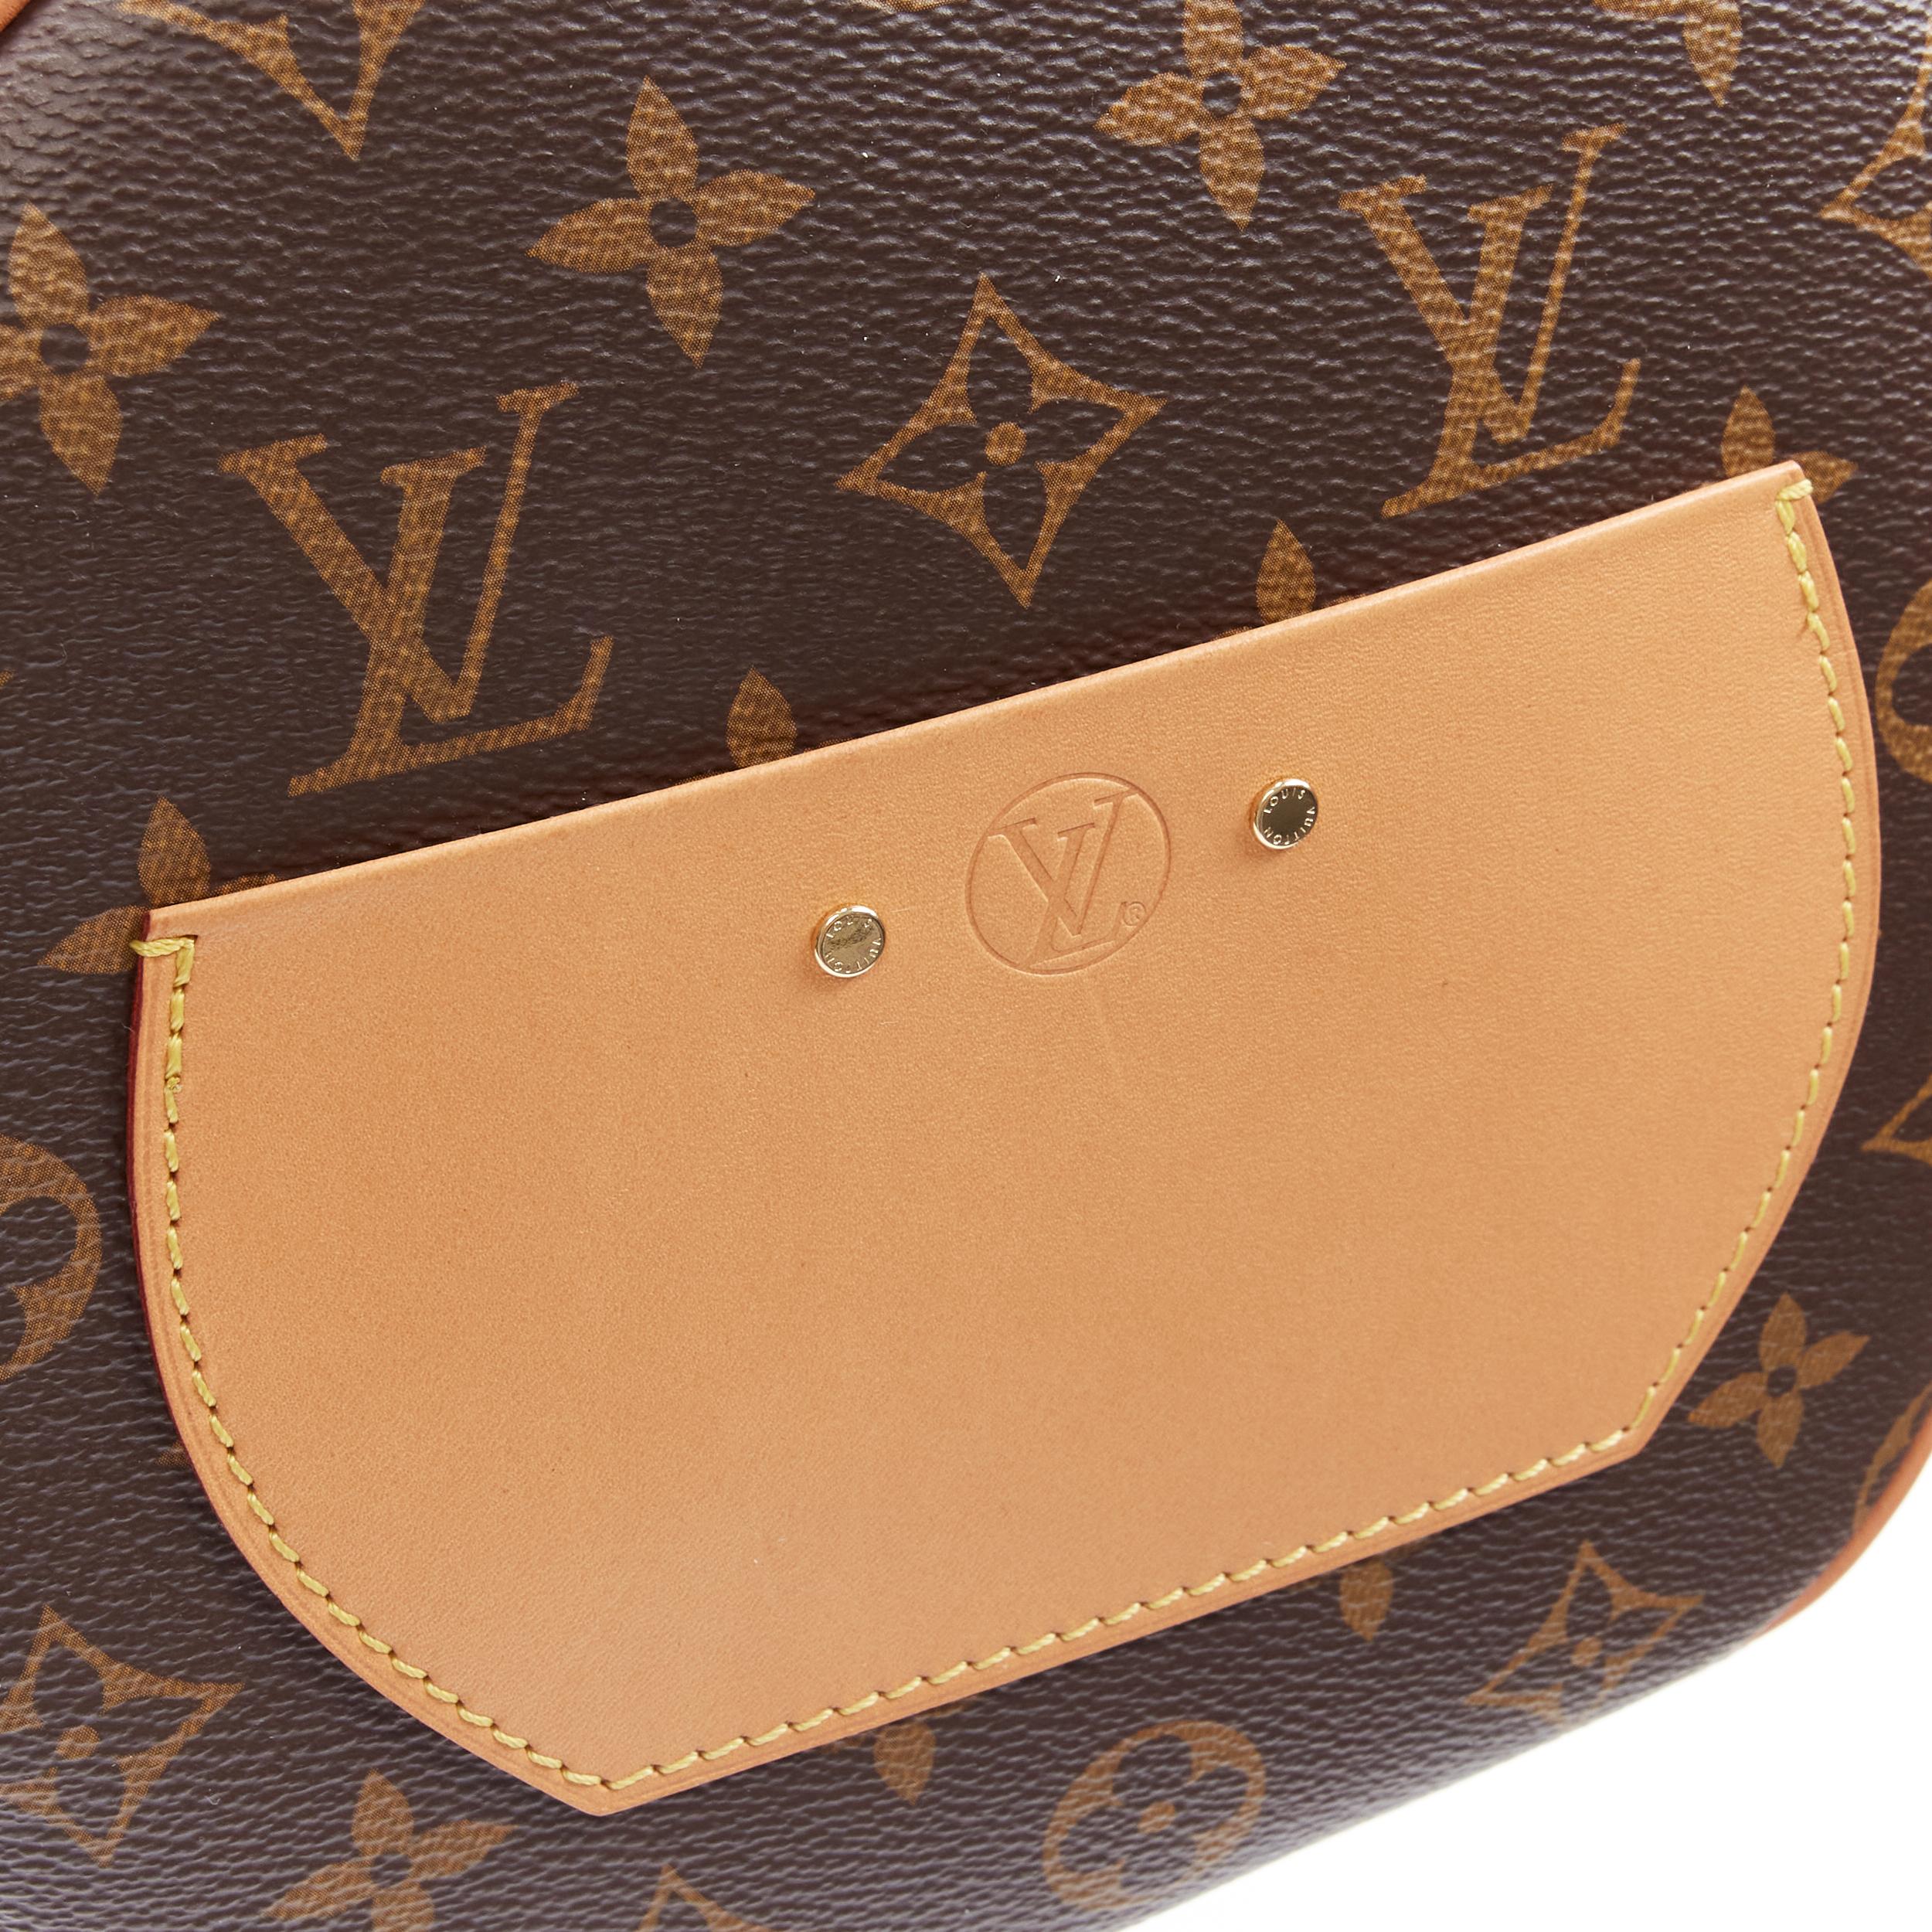 LOUIS VUITTON 2018 Boite Chapeau MM brown coated canvas rounded top crossbody  For Sale 1